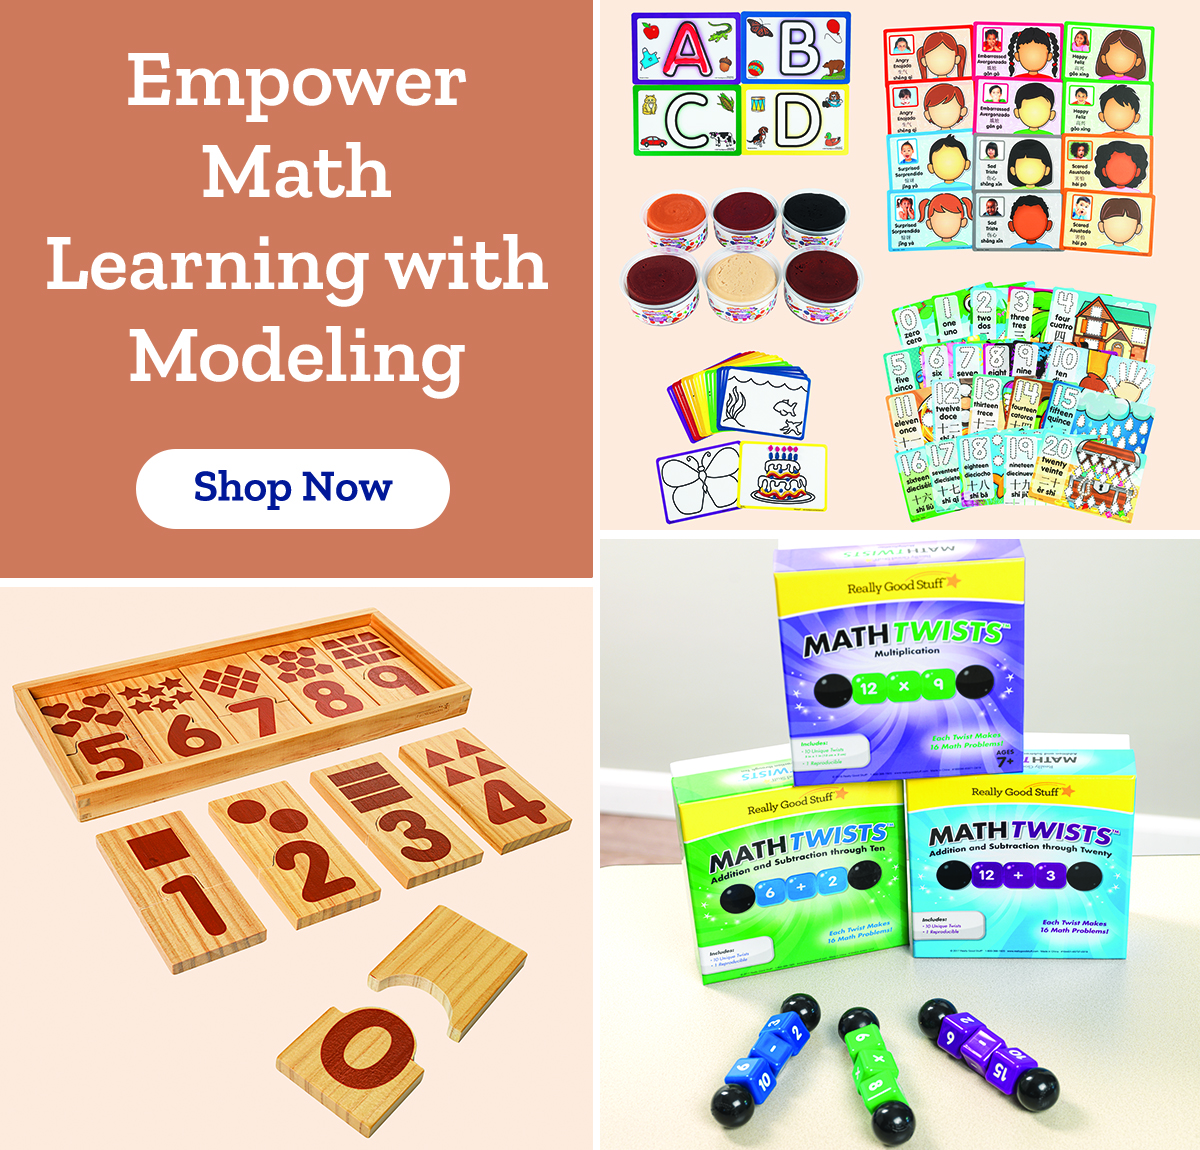 Empower Math Learning with Modeling